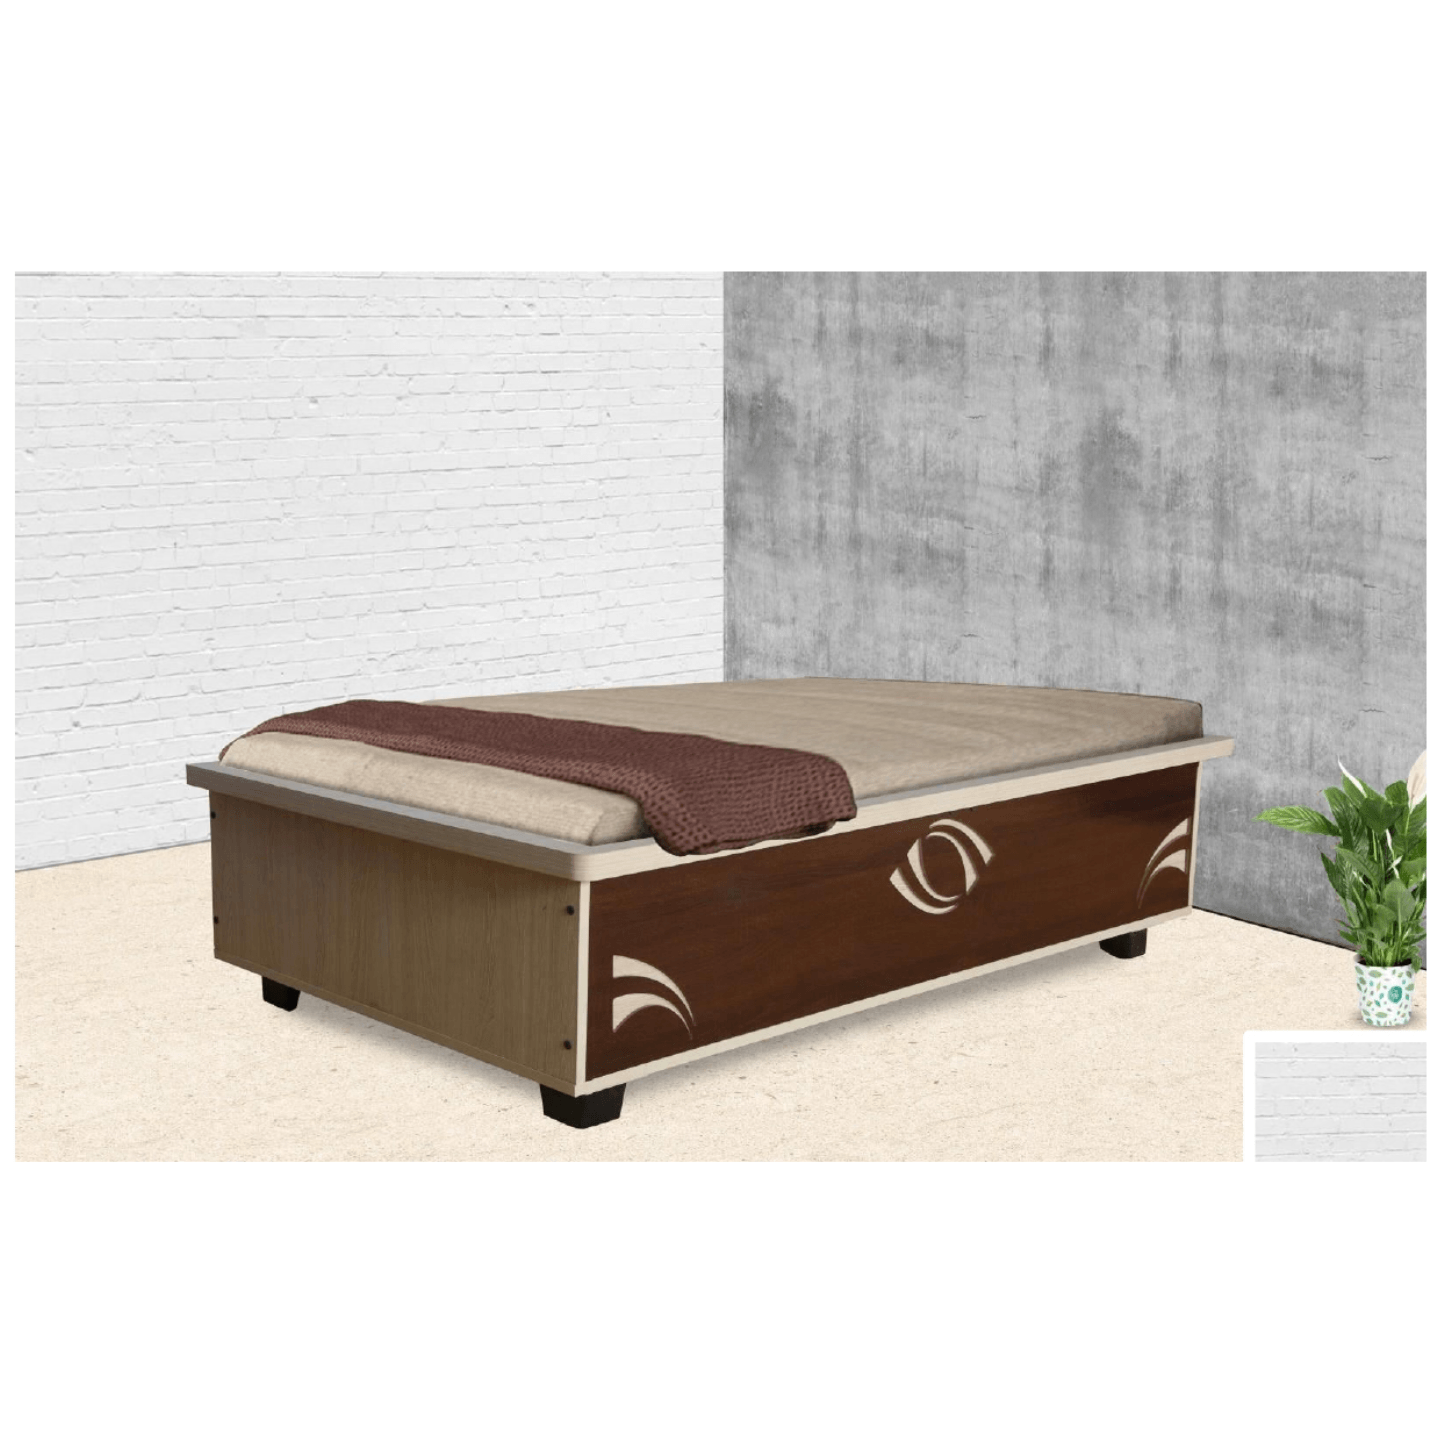 HS Single Bed Size 72"x30" Fancy In Brown Colour